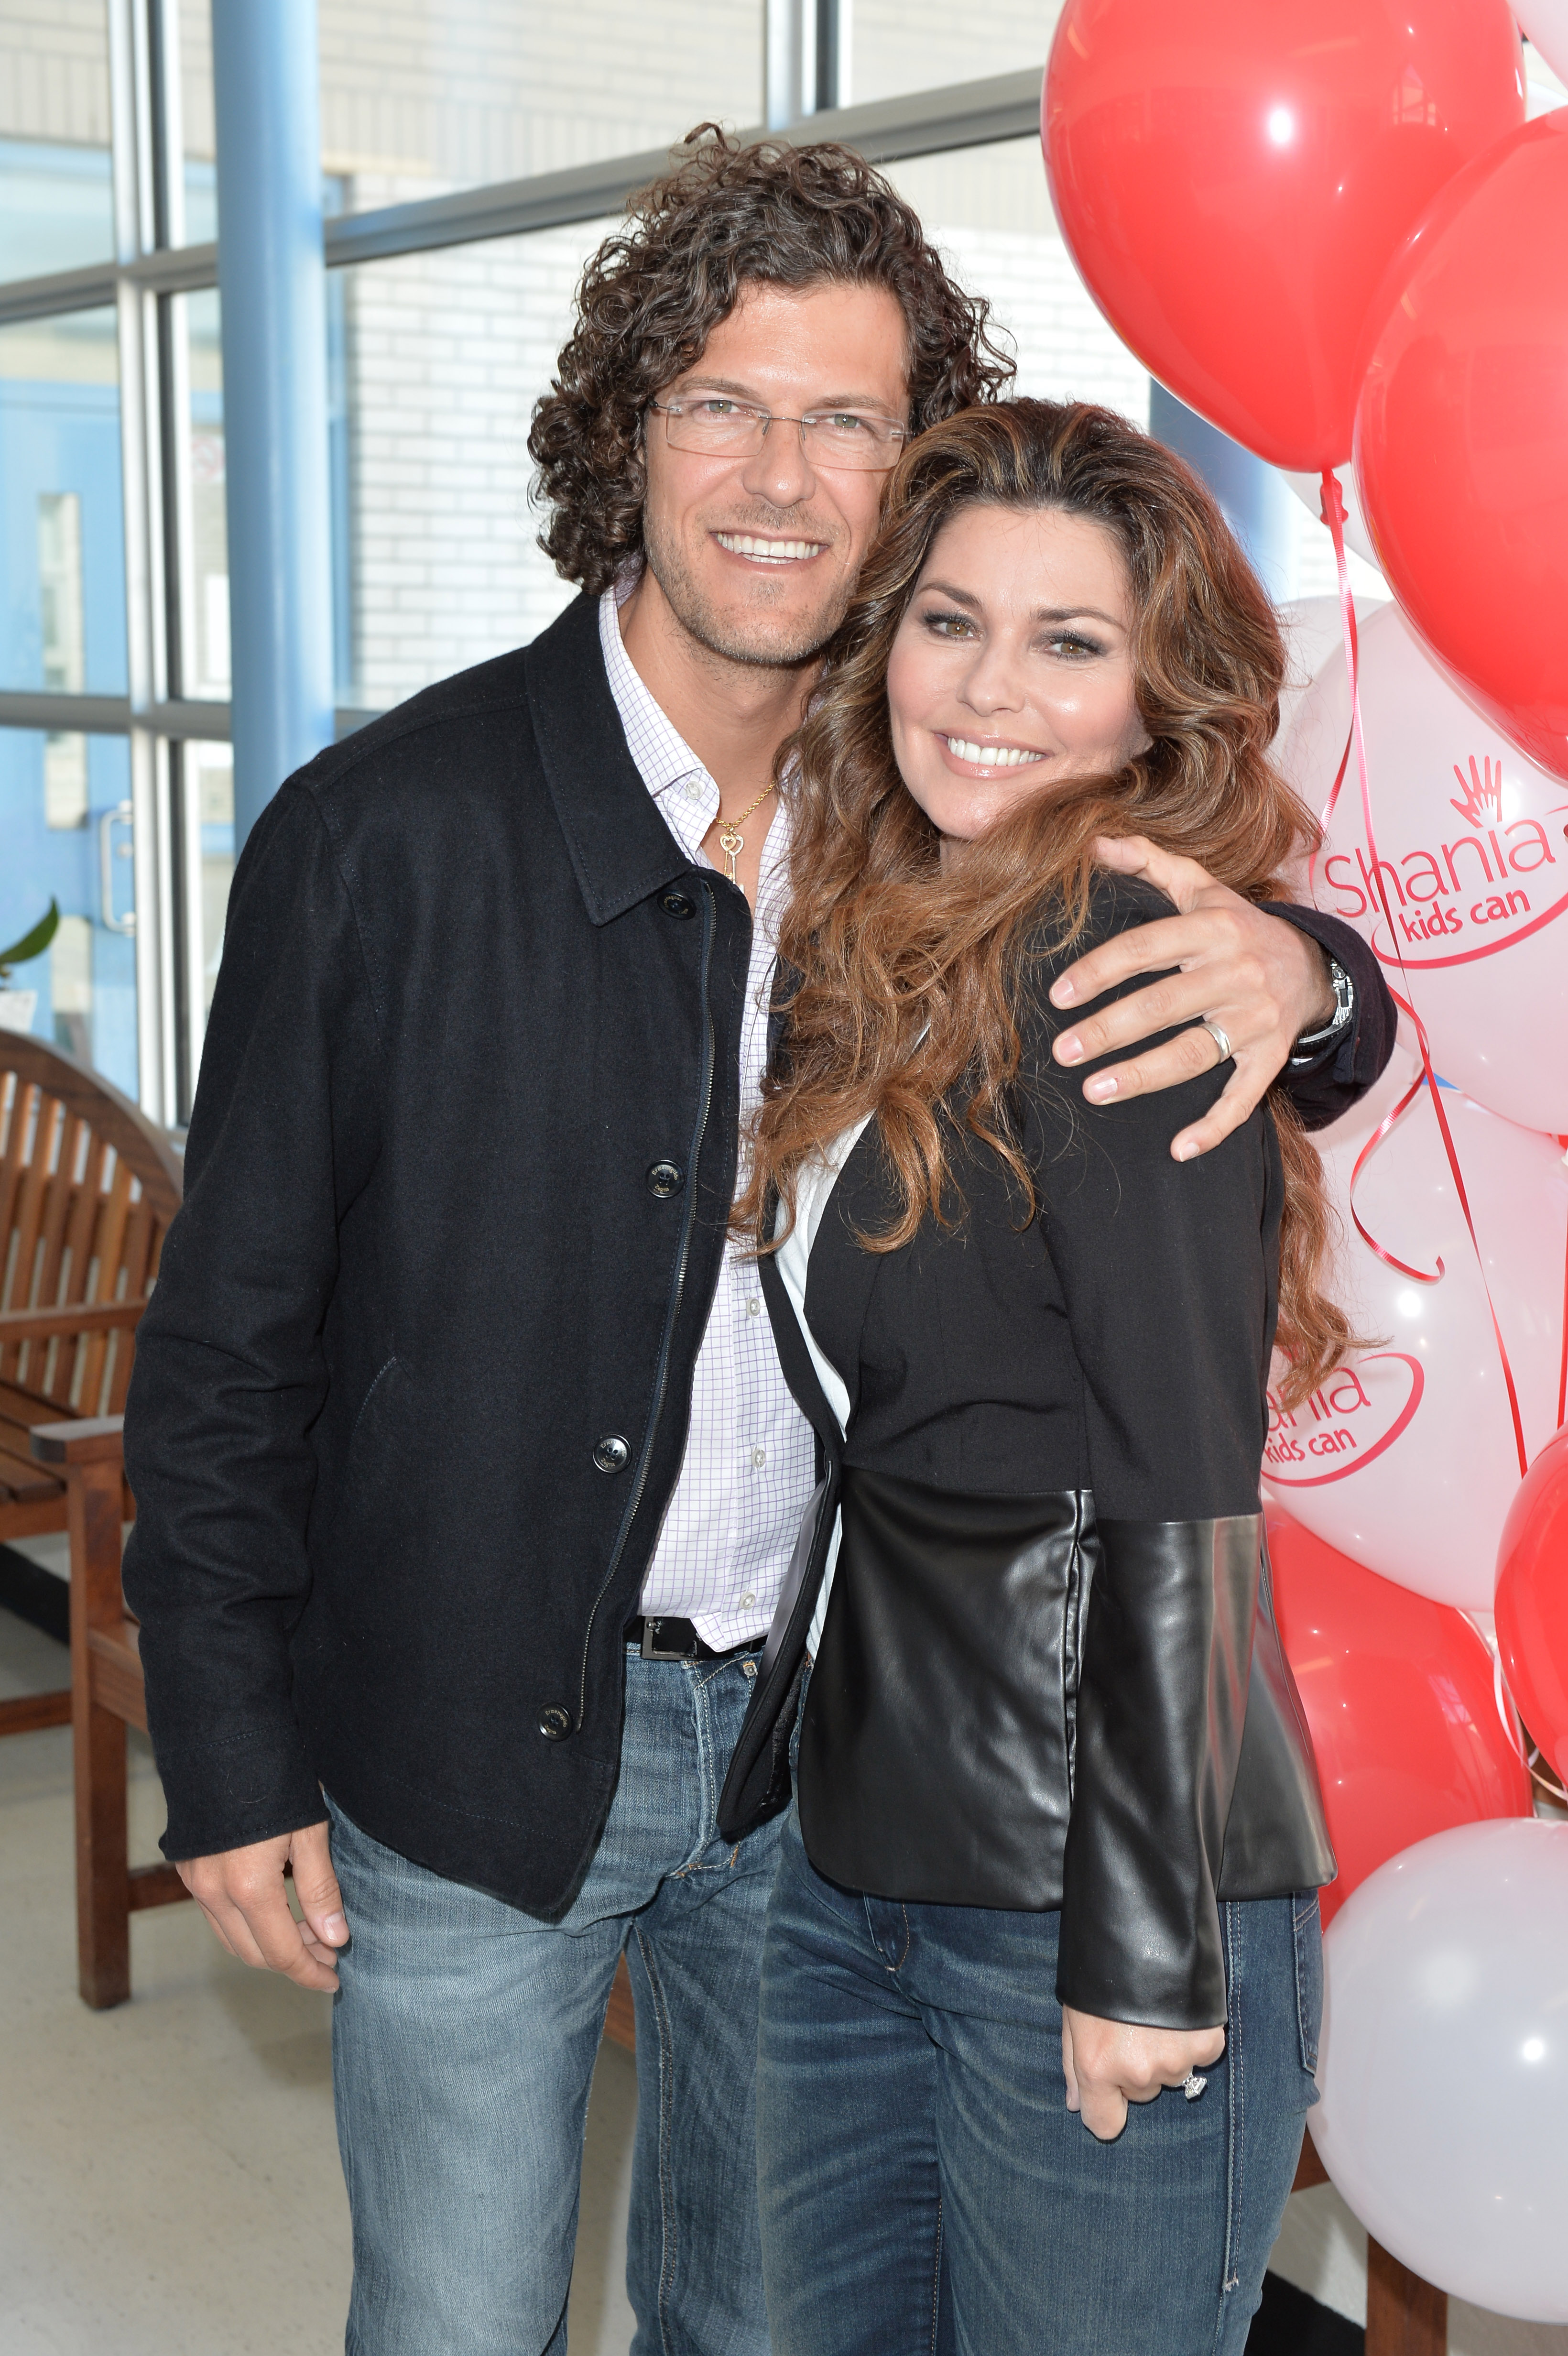 Frederic Thiebaud and Shania Twain in Canada in 2014 | Source: Getty Images